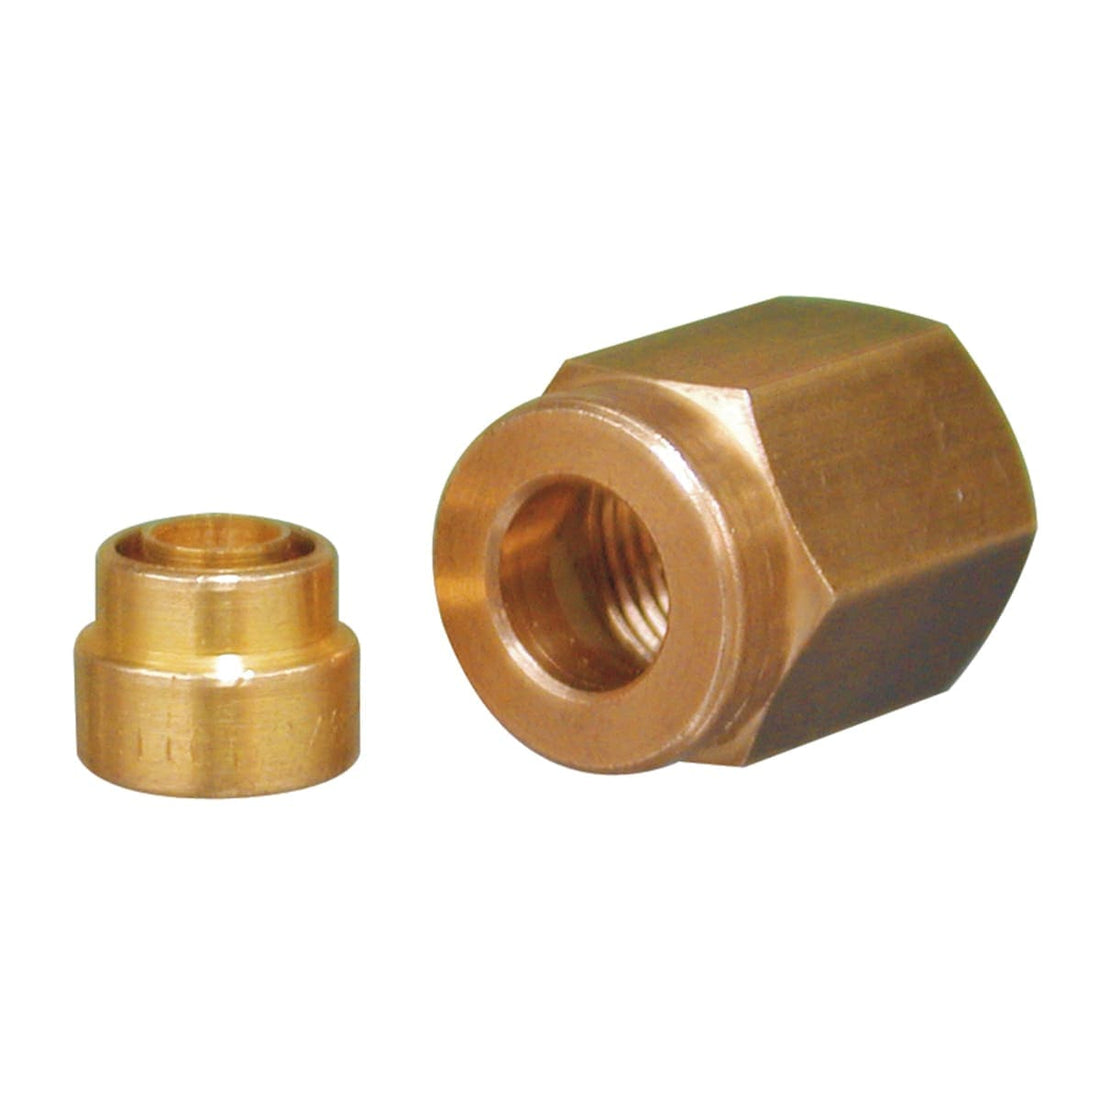 1/2 INCH DIA. SELF-CLOSING UNION FOR COPPER AIR CONDITIONING PIPE - best price from Maltashopper.com BR430005973